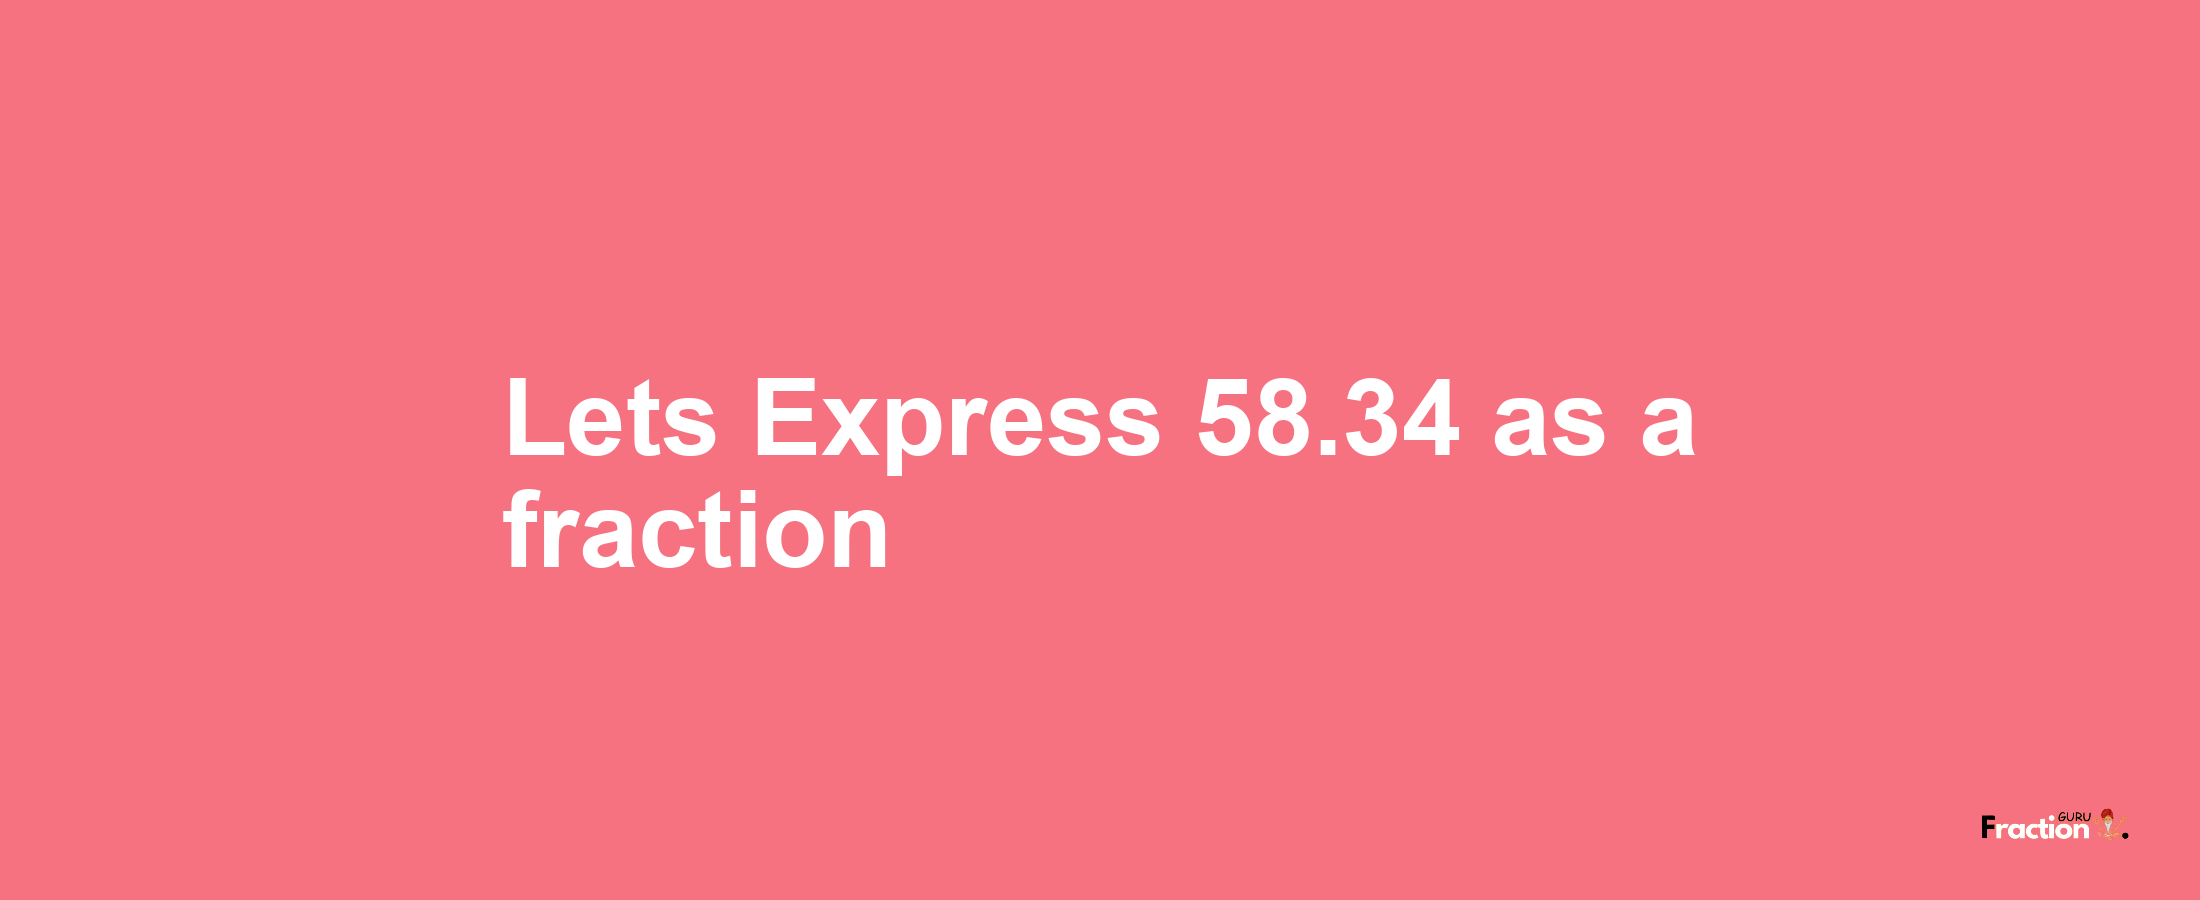 Lets Express 58.34 as afraction